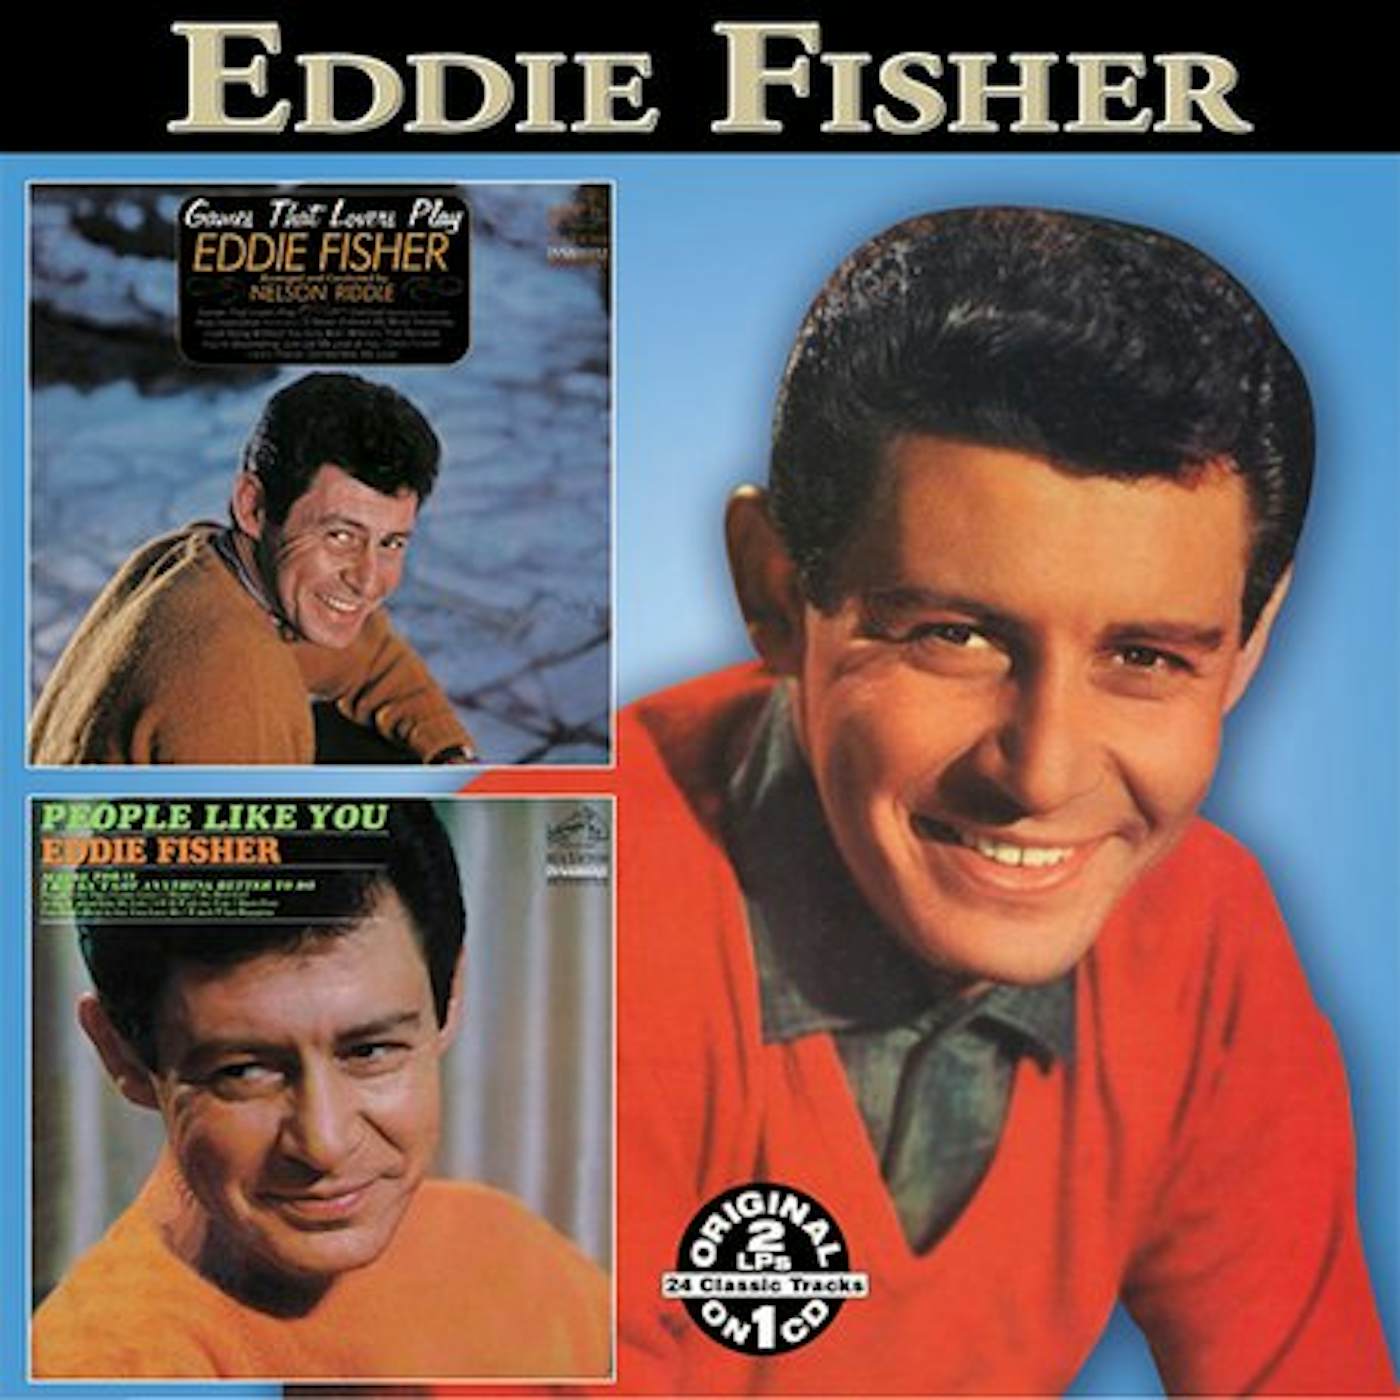 Eddie Fisher GAMES THAT LOVERS PLAY / PEOPLE LIKE YOU CD